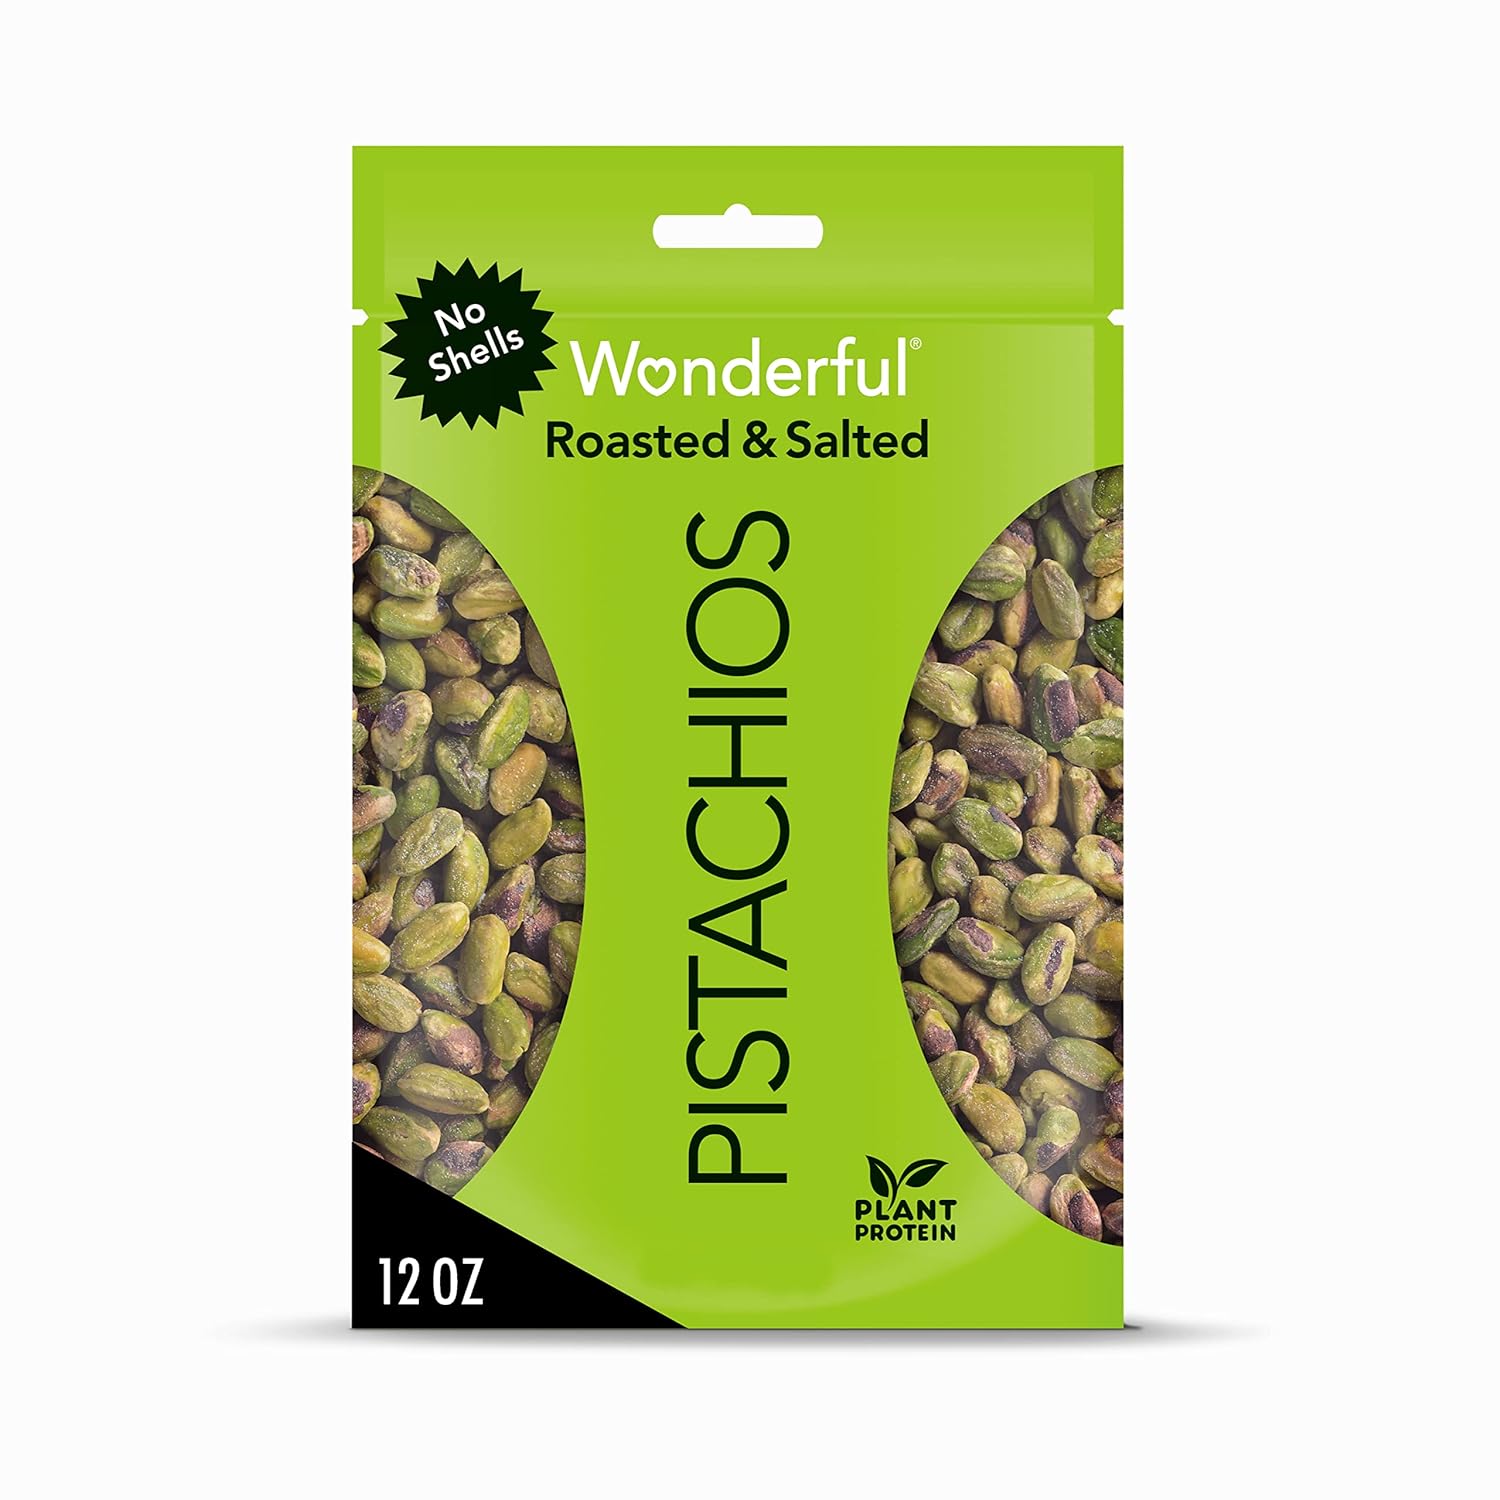 Wonderful Pistachios, No Shells, Roasted and Salted Nuts, 12 Ounce Resealable Bag, Good Source of Protein, Gluten Free,